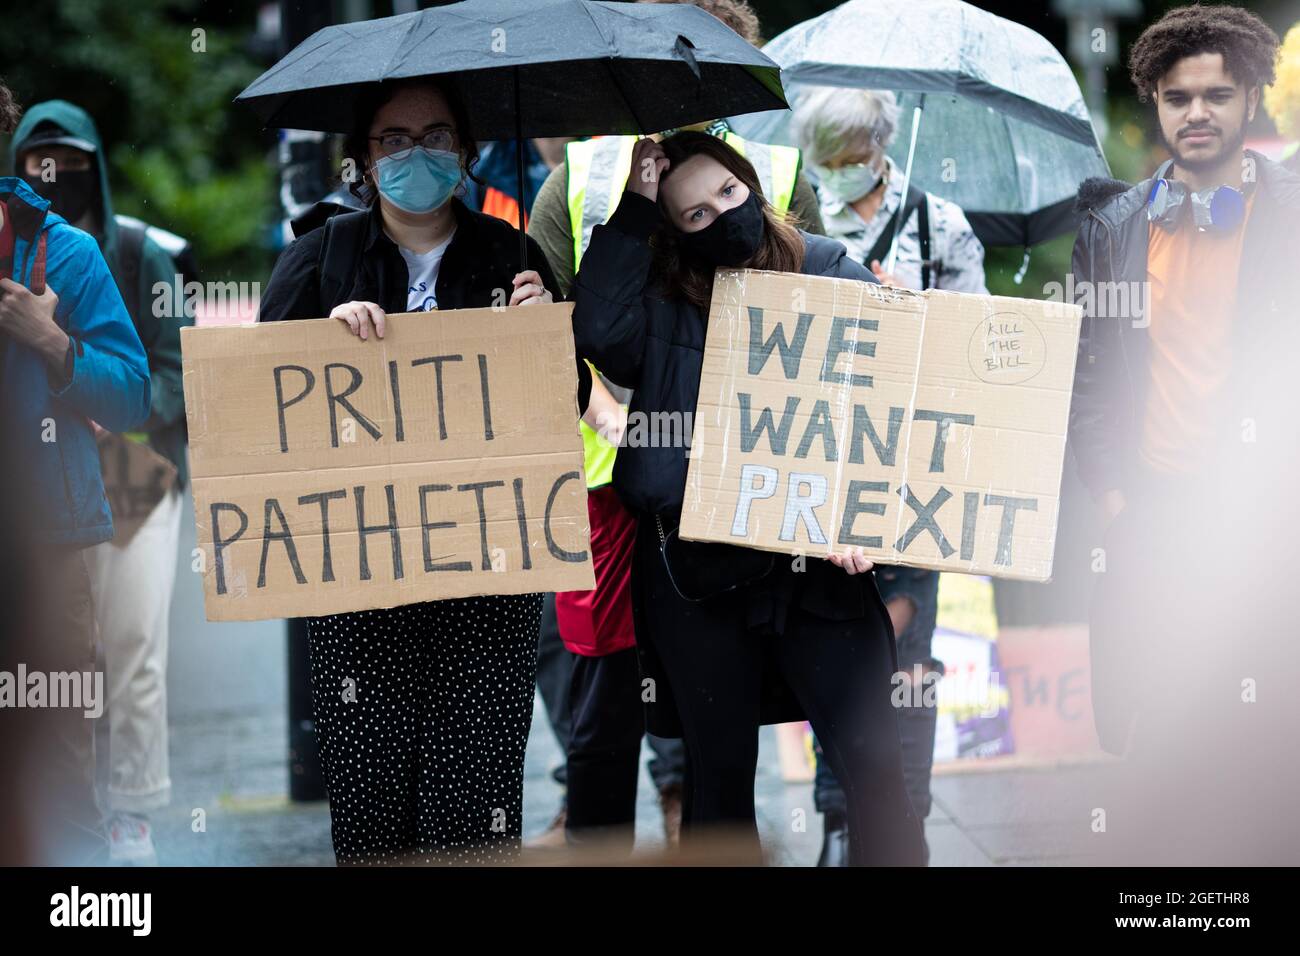 Manchester, UK. 21st Aug, 2021. Protesters with placards stand outside the Civil Justice Centre. Protests across the country have been organised due to the proposed Police, Crime and Sentencing Bill that, if passed, would introduce new legislation around demonstrations. Credit: Andy Barton/Alamy Live News Stock Photo